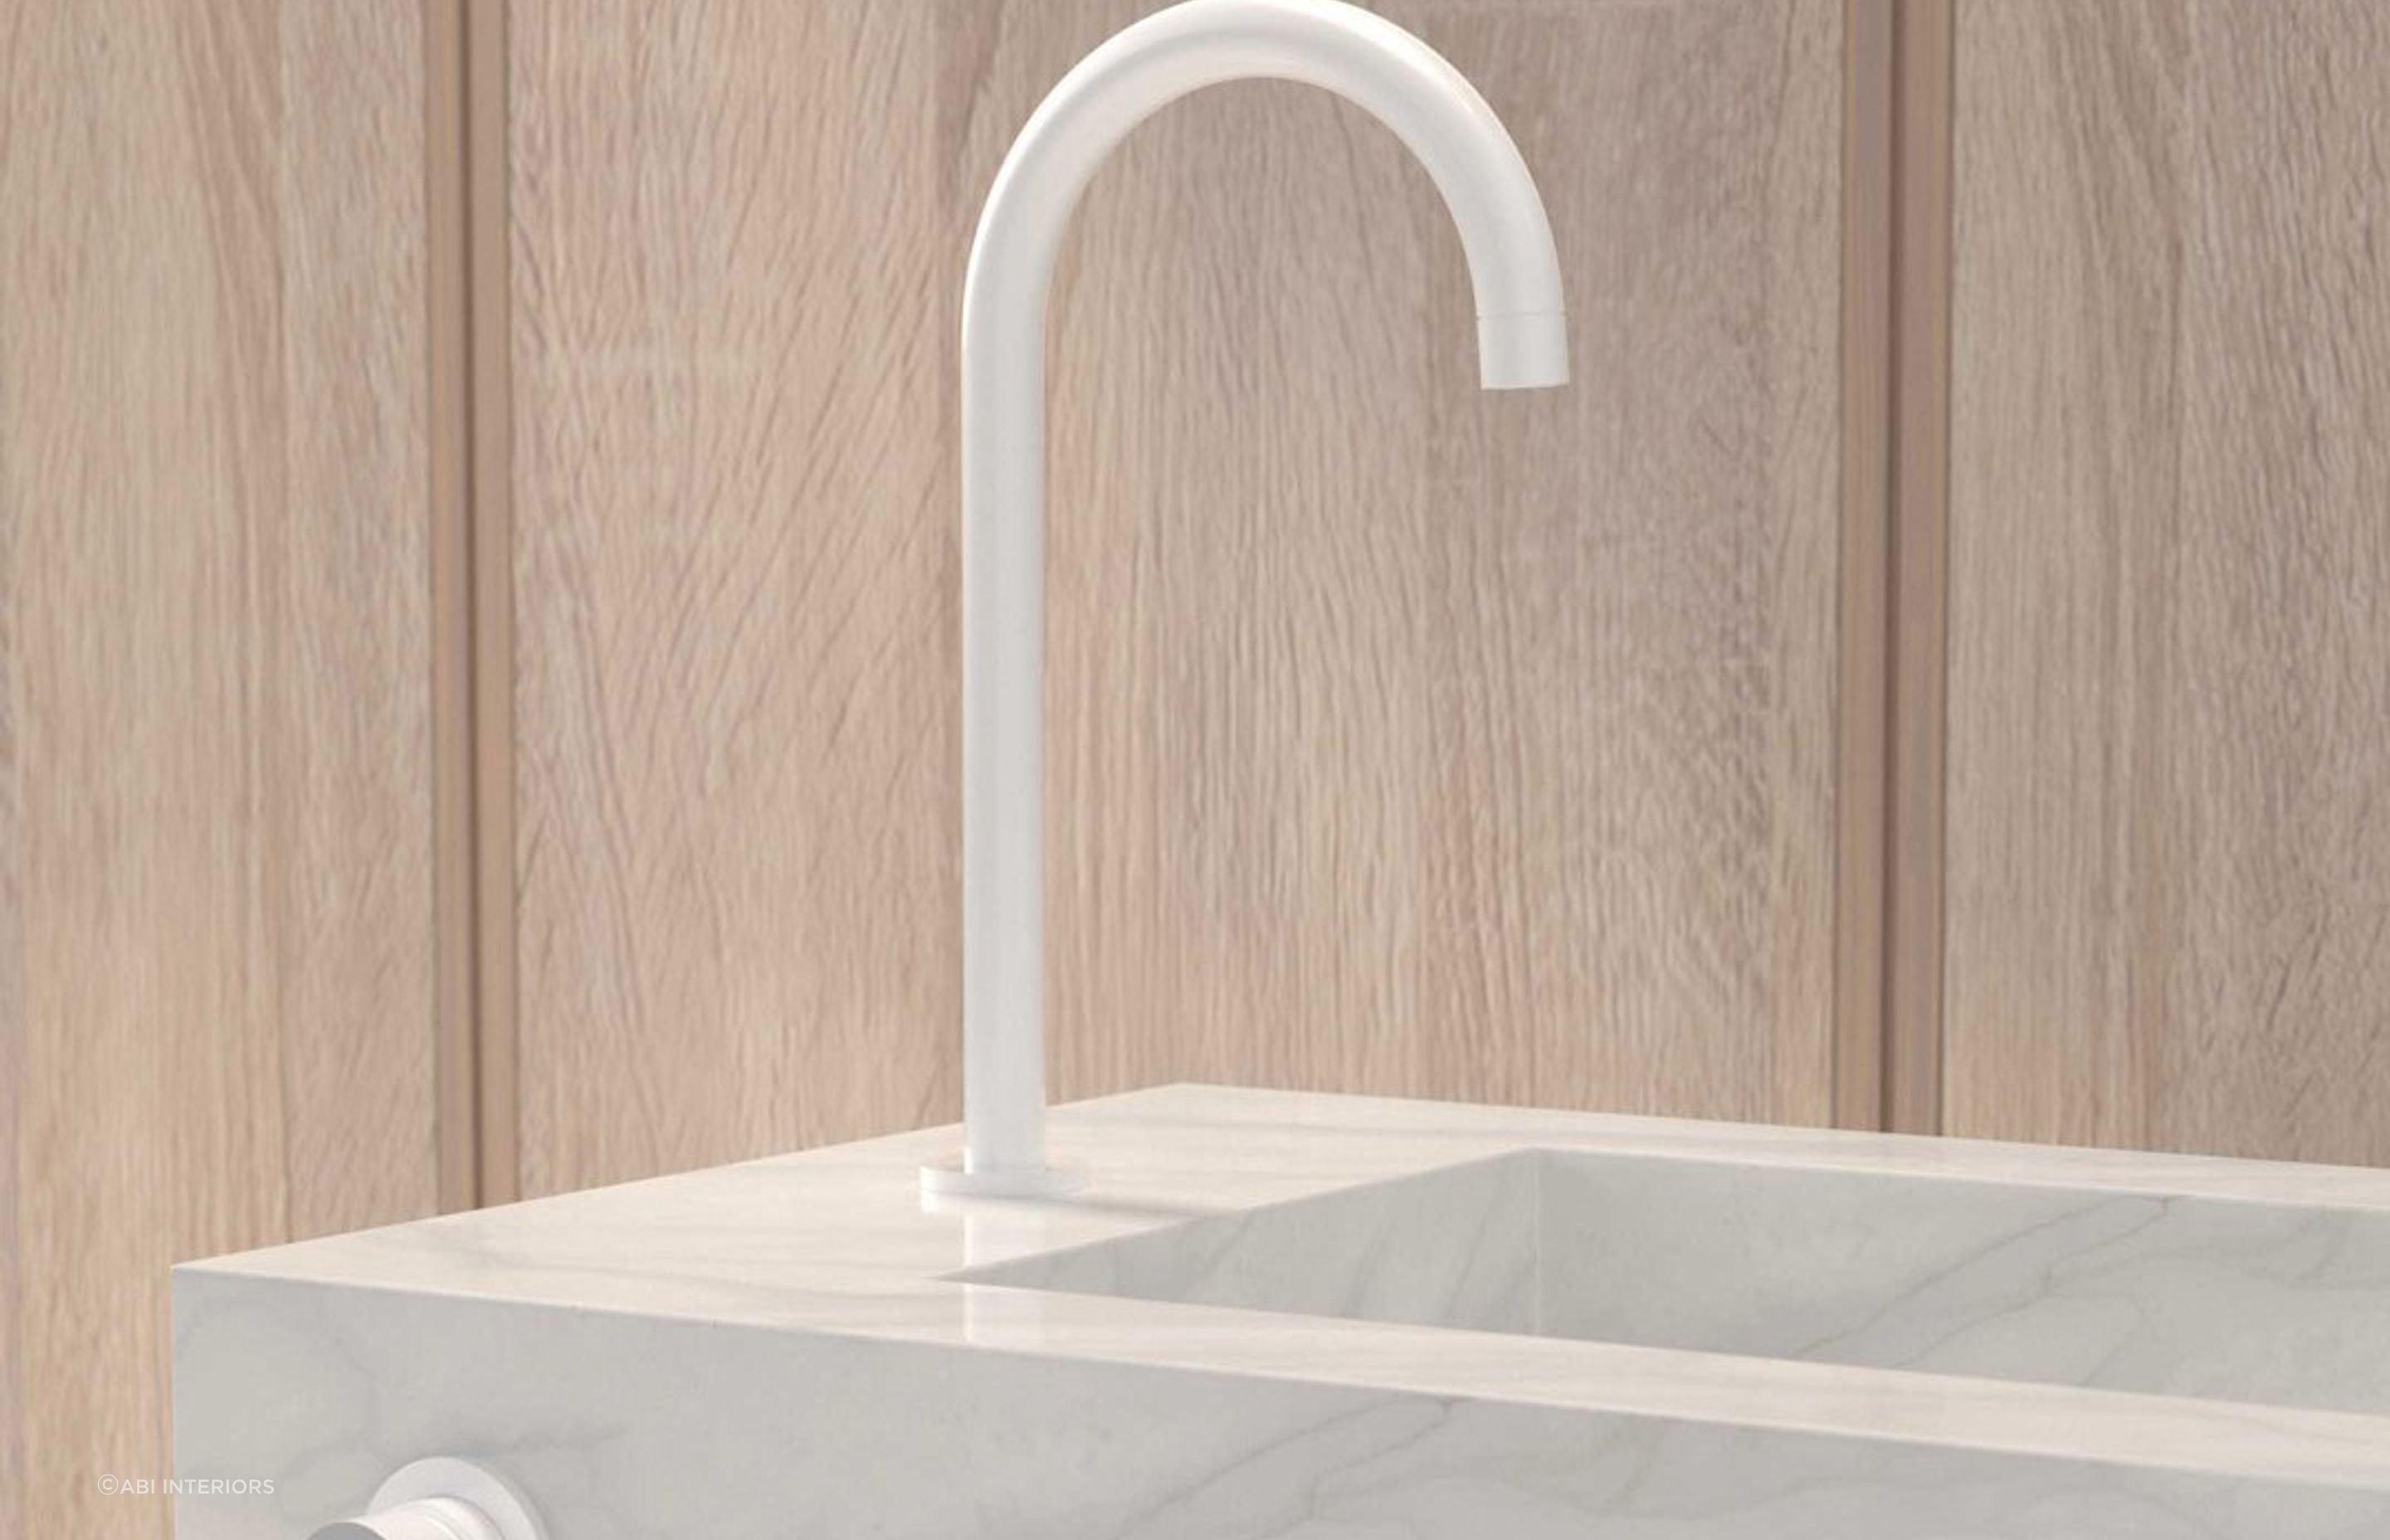 Elegance personified with the ABI Gooseneck Hob Spout Tap